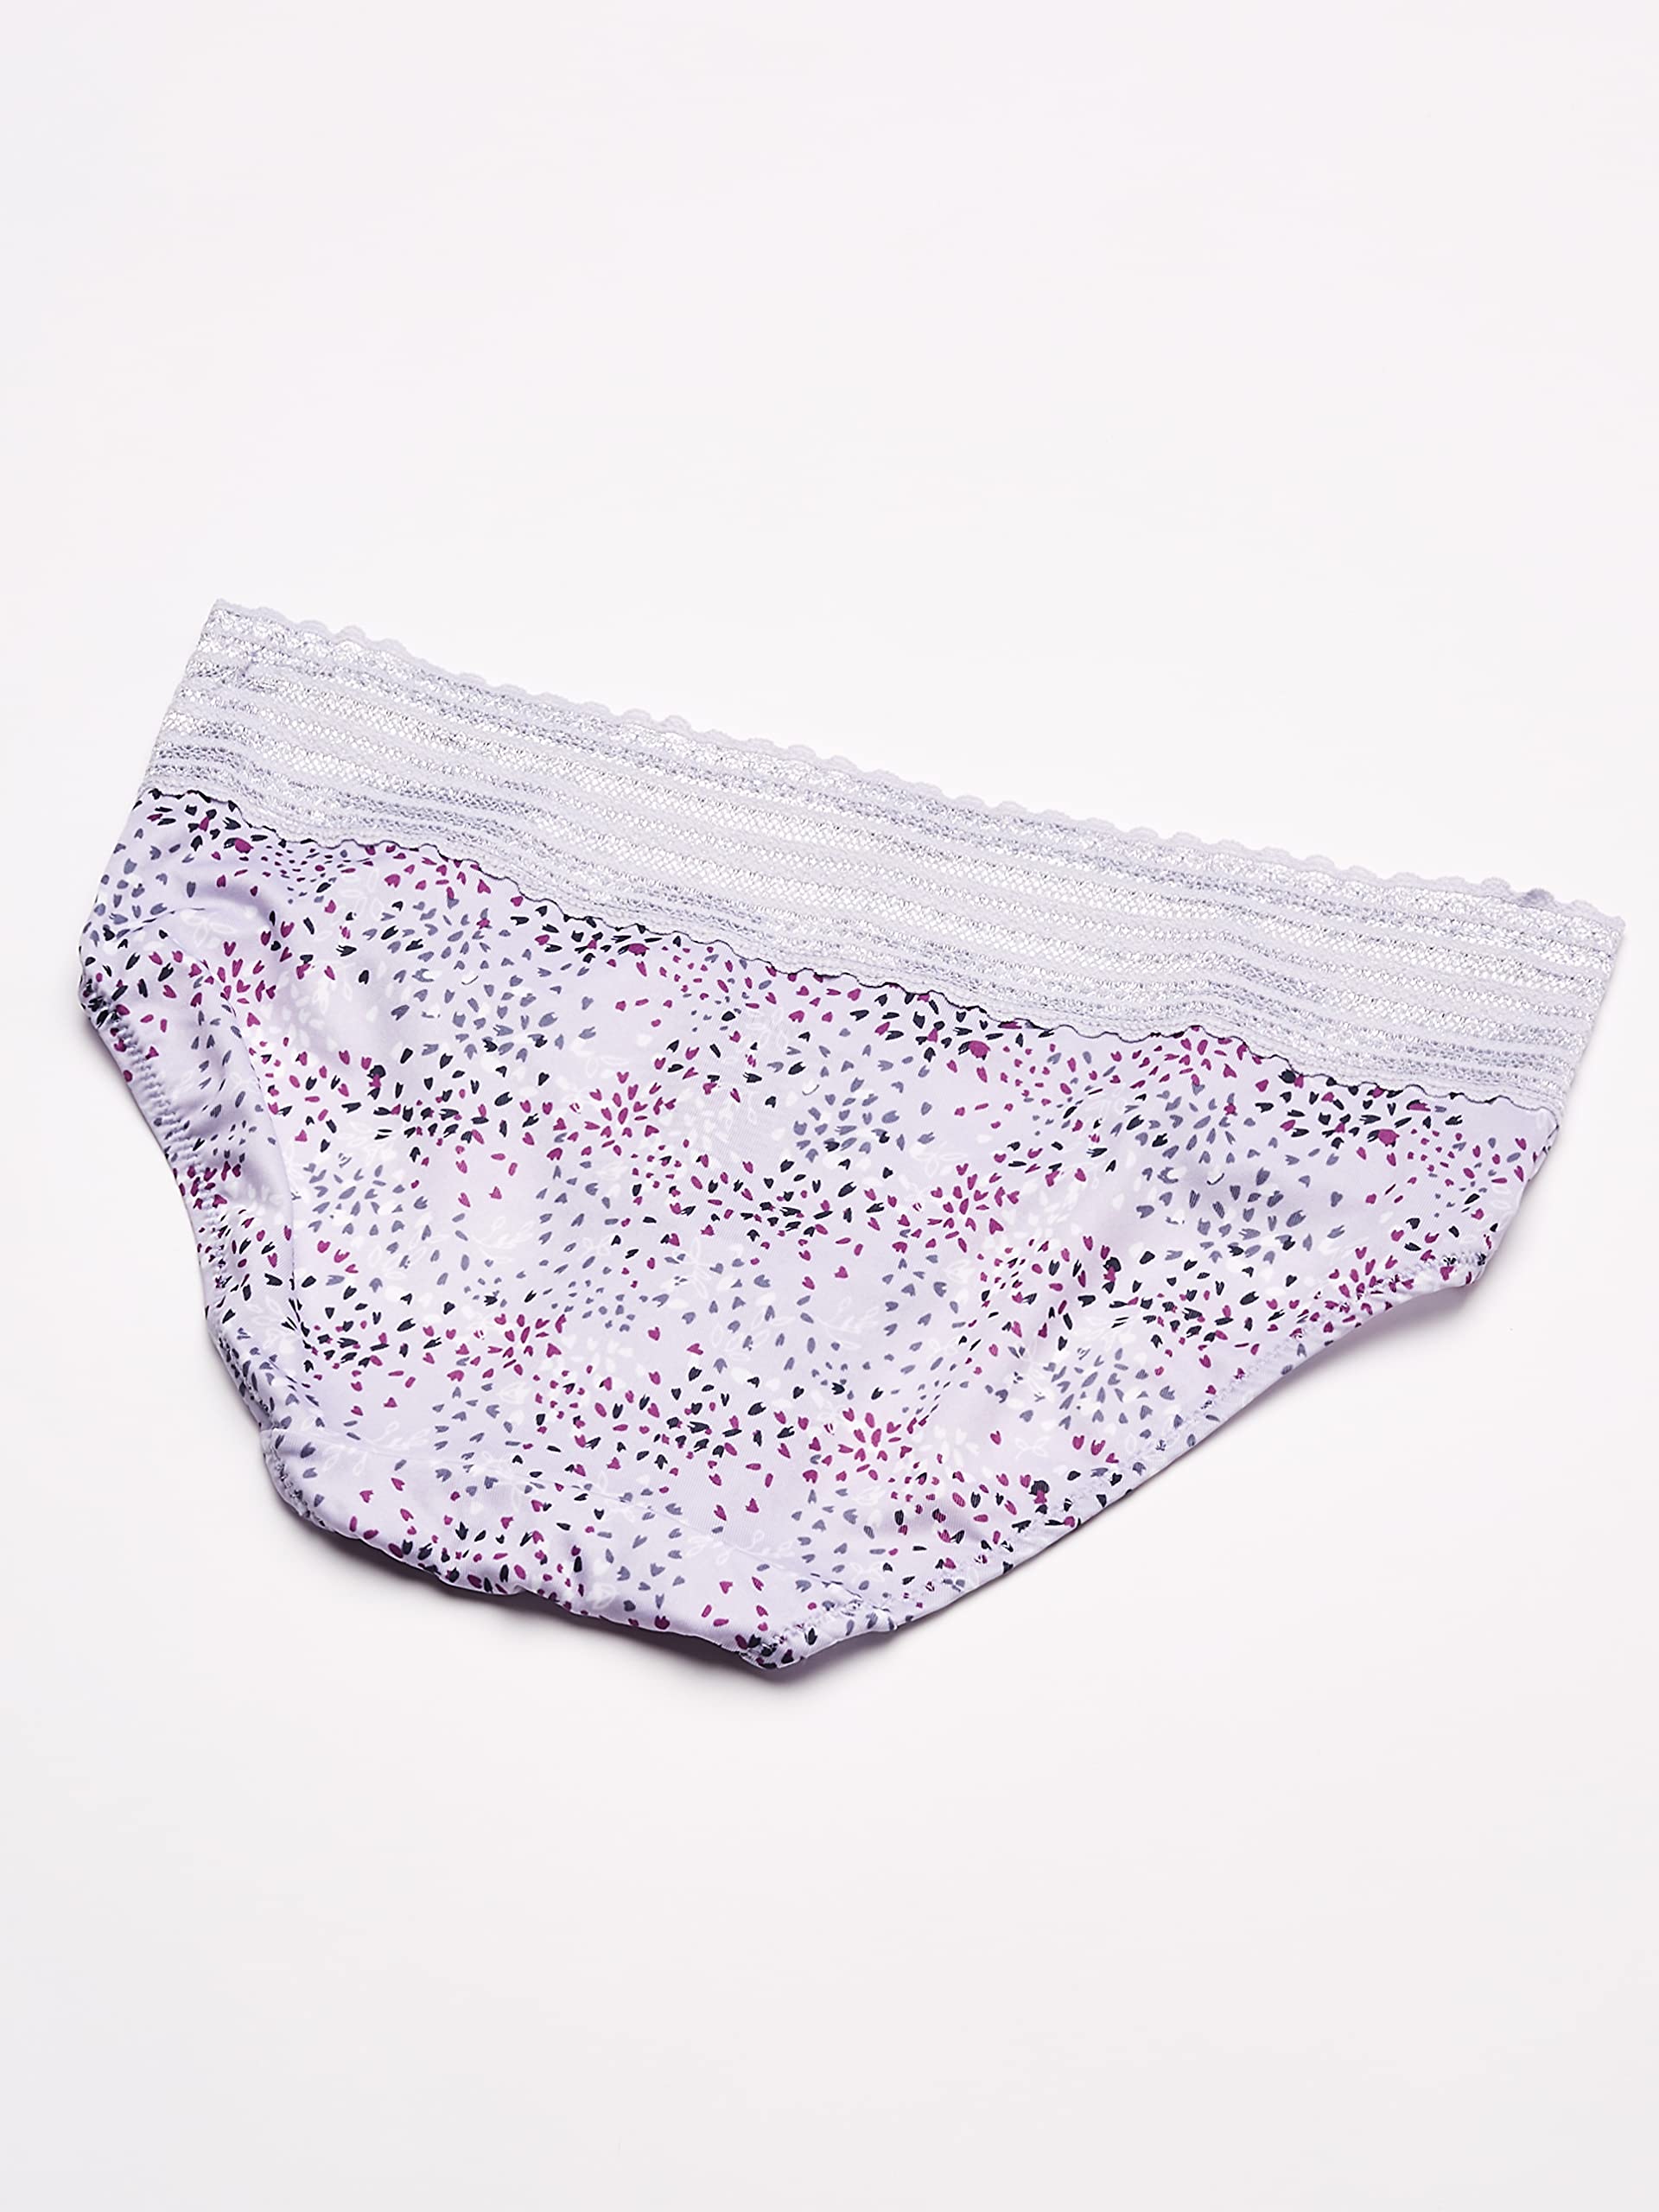 Warner's womens Blissful Benefits No Muffin 3 Pack Hipster Panties